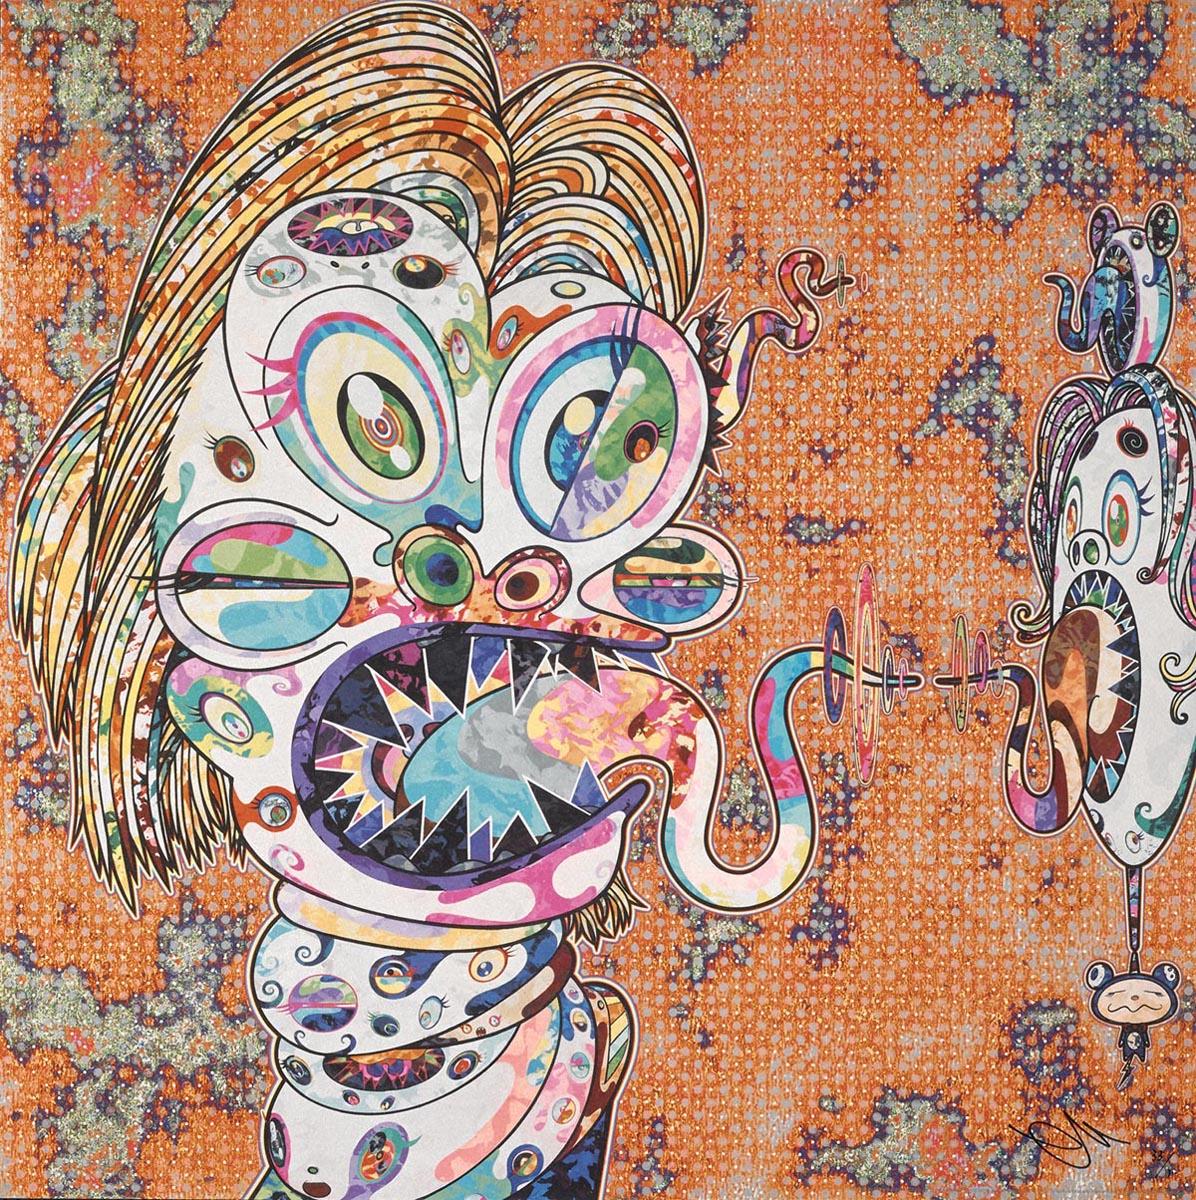 Takashi Murakami Figurative Print - Homage to Francis Bacon (Study for Head of Isabel Rawsthorne, moiré)